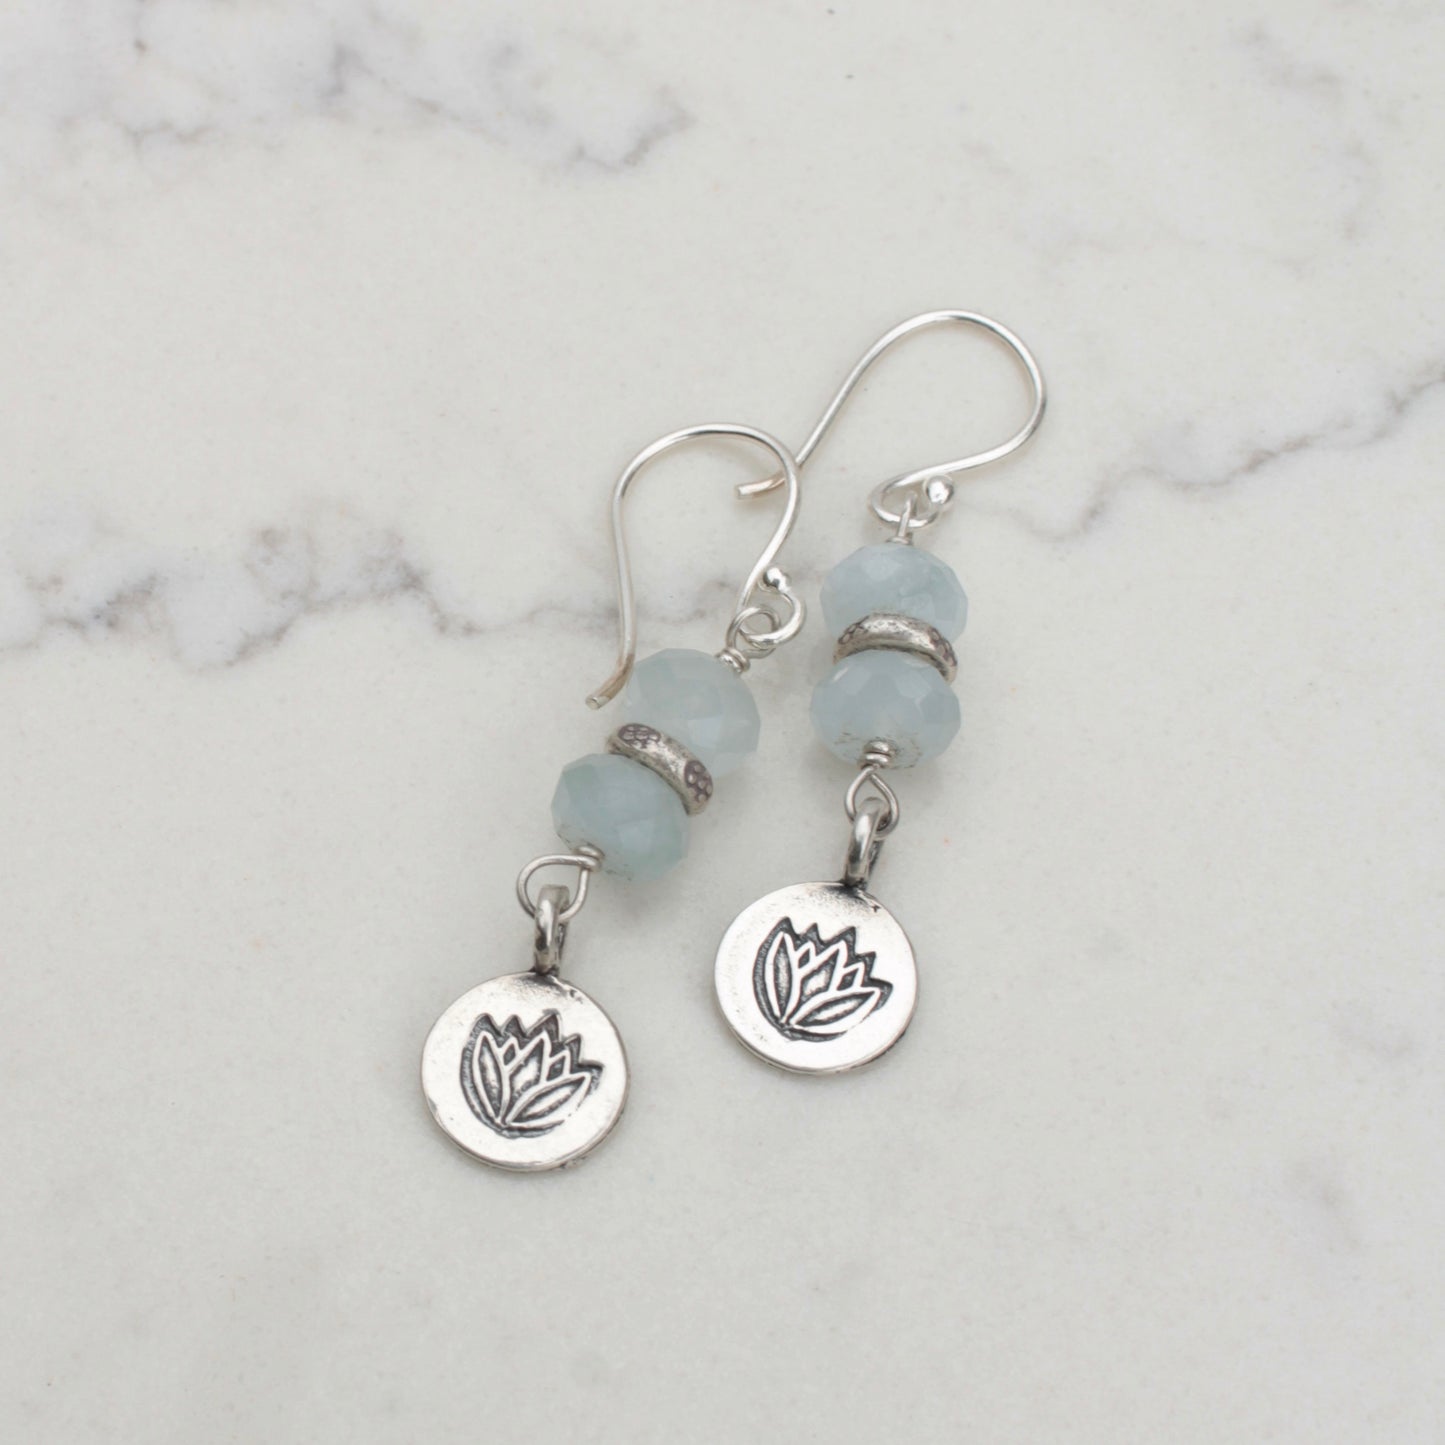 Aquamarine stack earrings with lotus flower round charm dangle